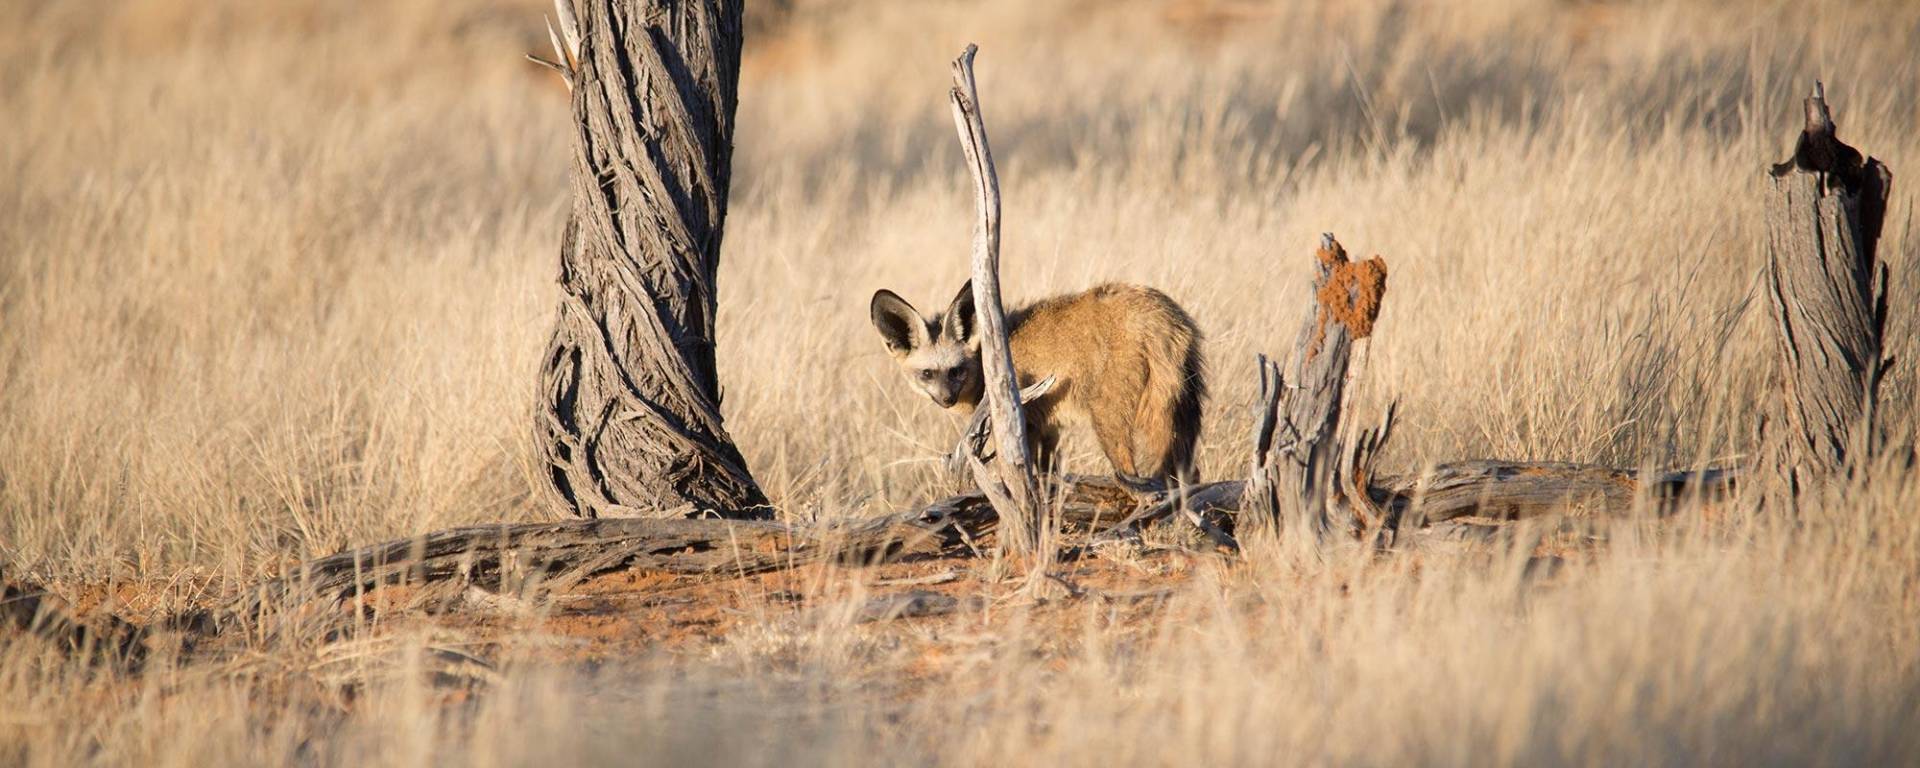 Bat eared fox searching for termites